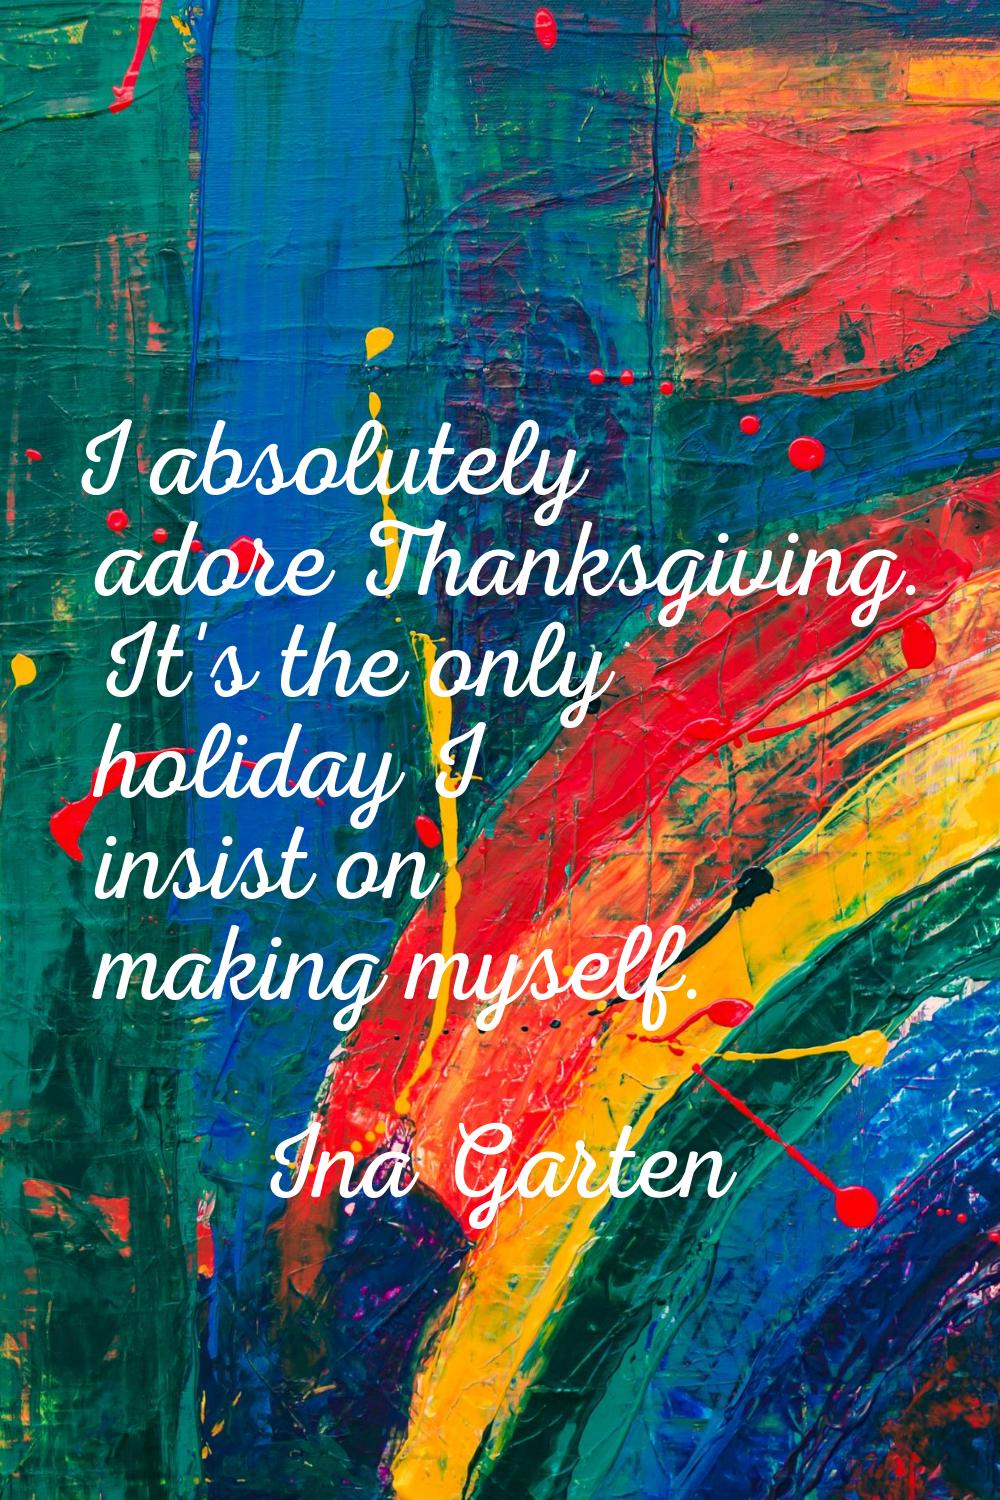 I absolutely adore Thanksgiving. It's the only holiday I insist on making myself.